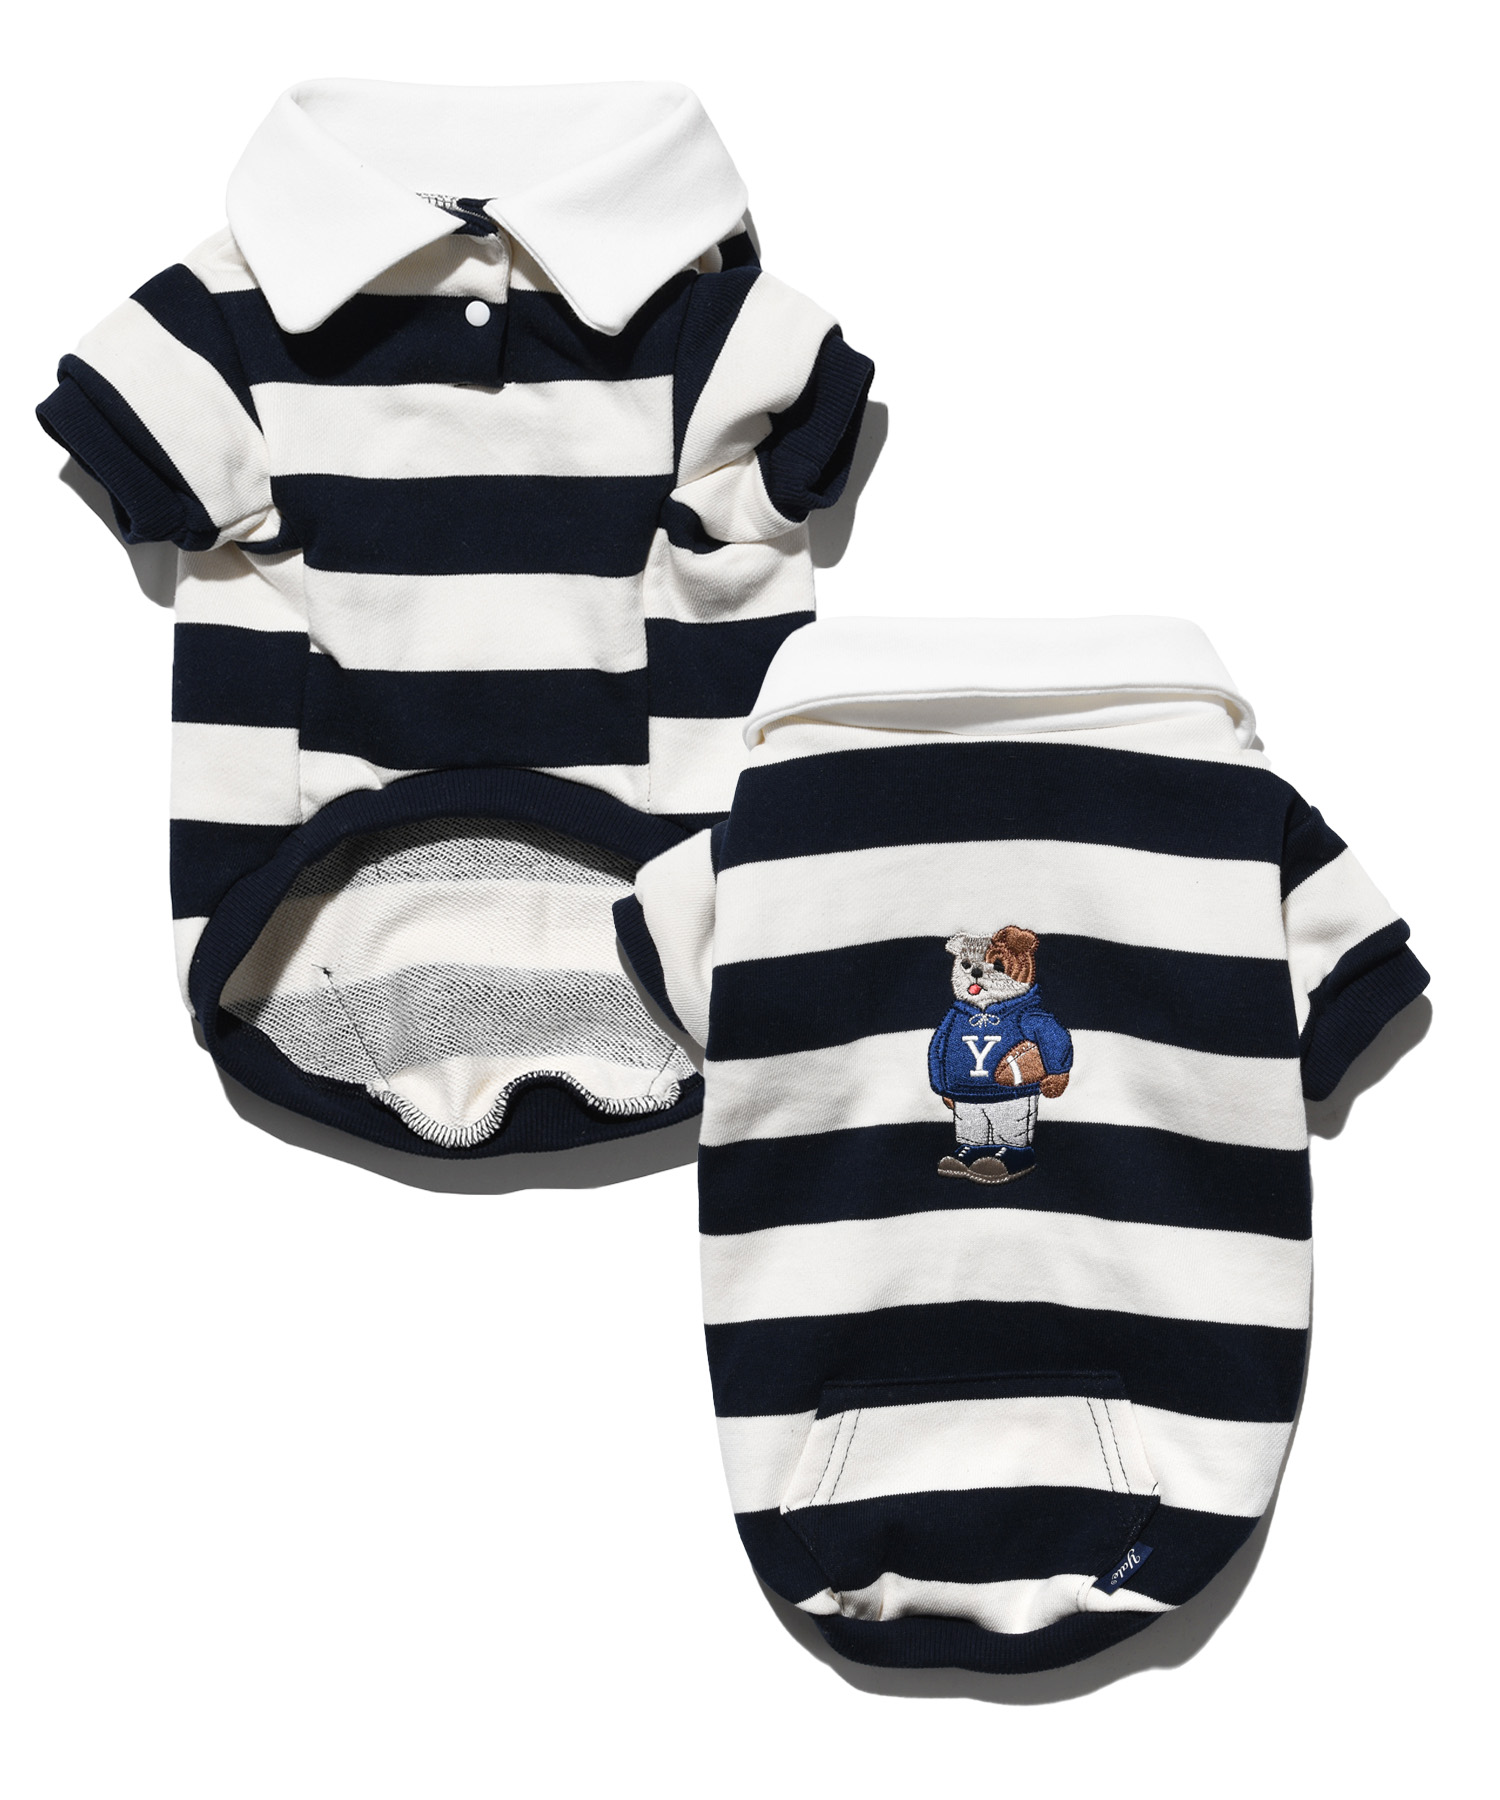 EMBROIDERY UNIVERSITY DAN DOGGY RUGBY SHIRT NAVY